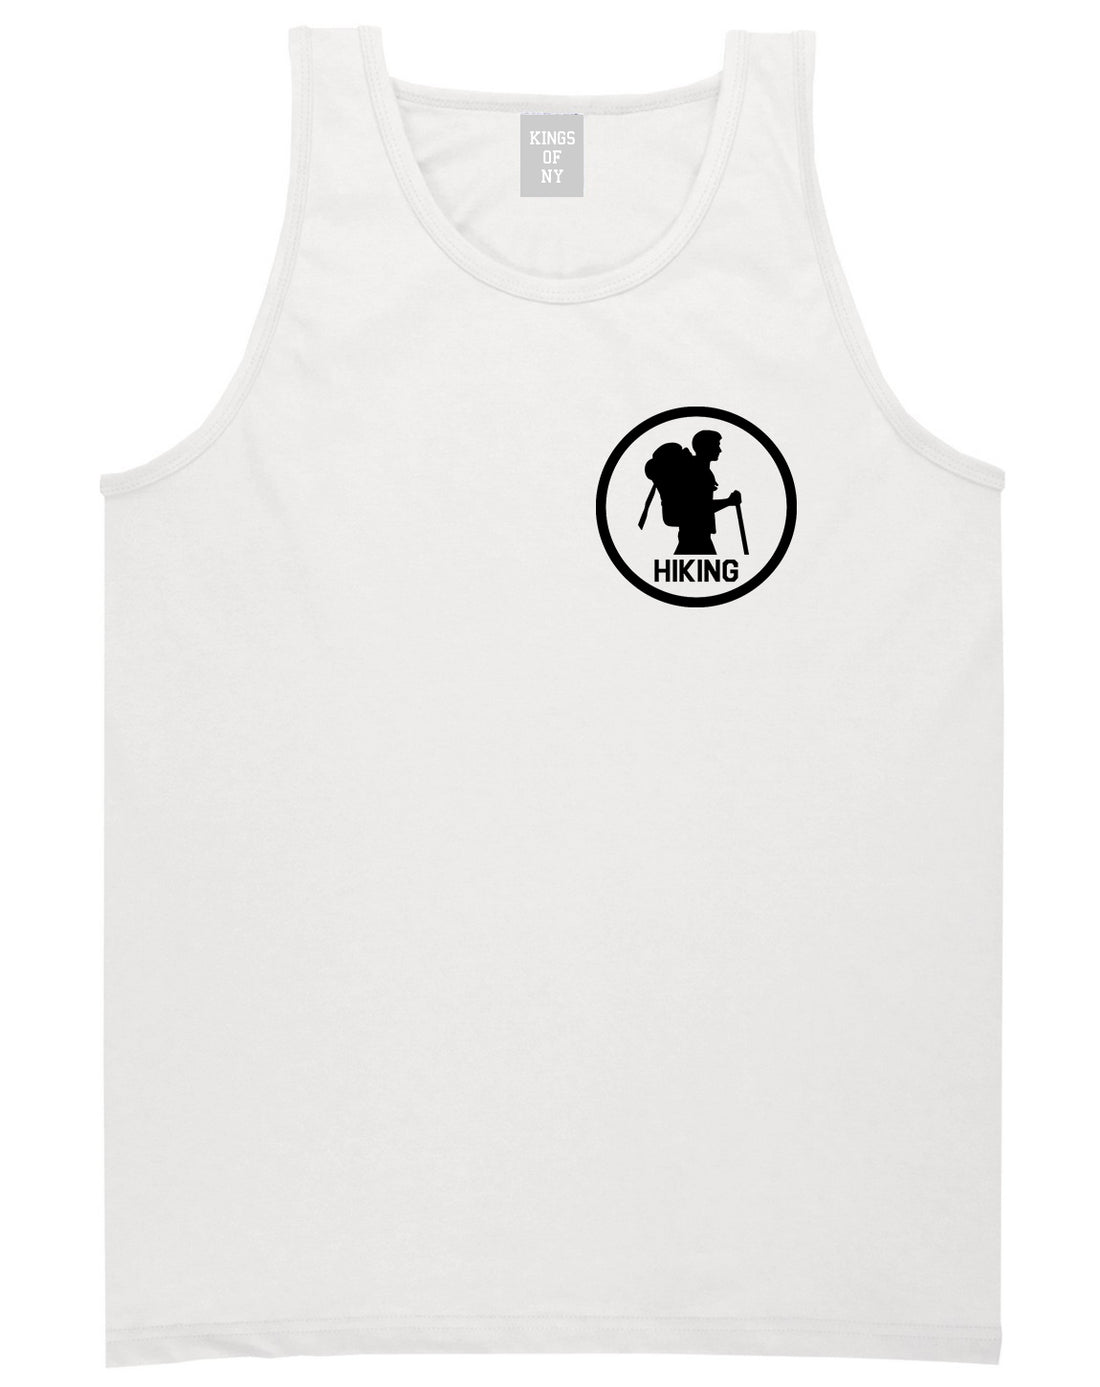 Backpacking Outdoor Hiking Chest White Tank Top Shirt by Kings Of NY